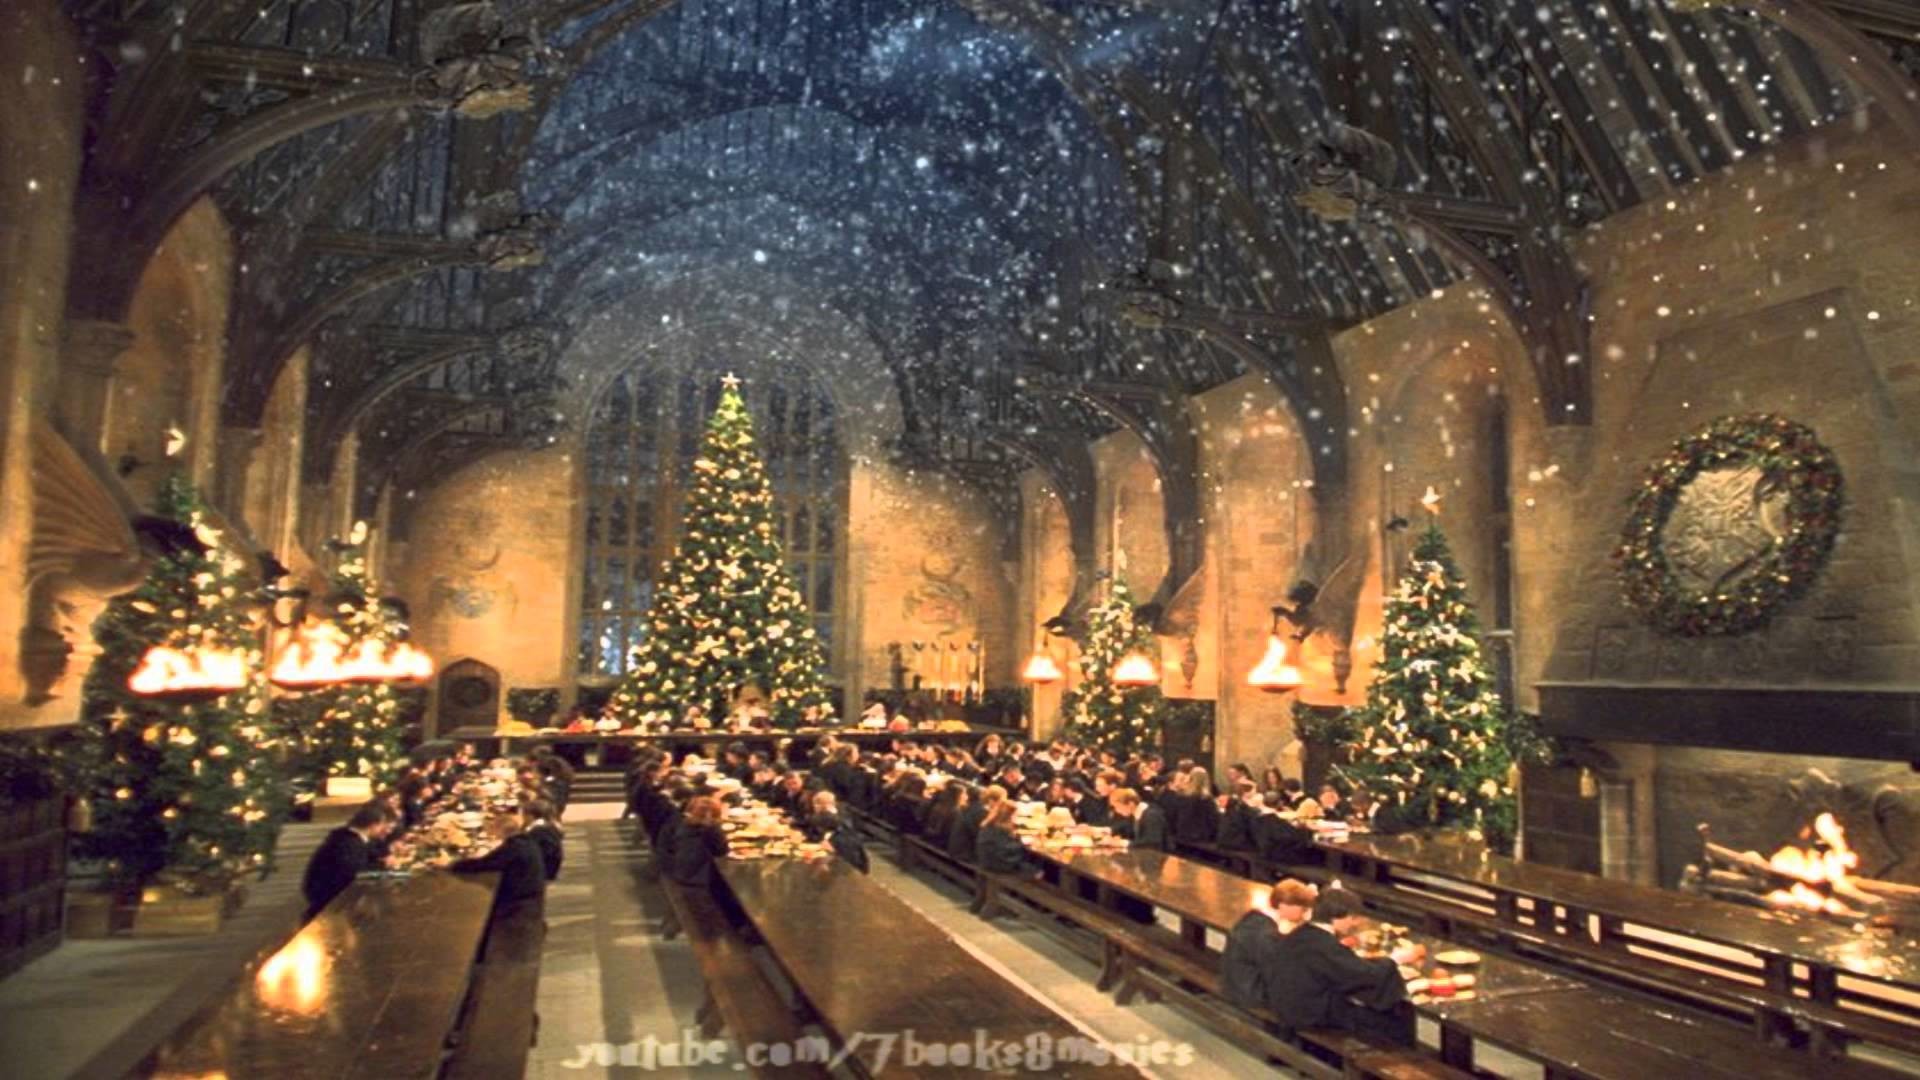 1920x1080 ... Fantastic Christmas Harry Potter Movies Widescreen Wallpapers 1920Ã1080  pixels We Try to Present Christmas